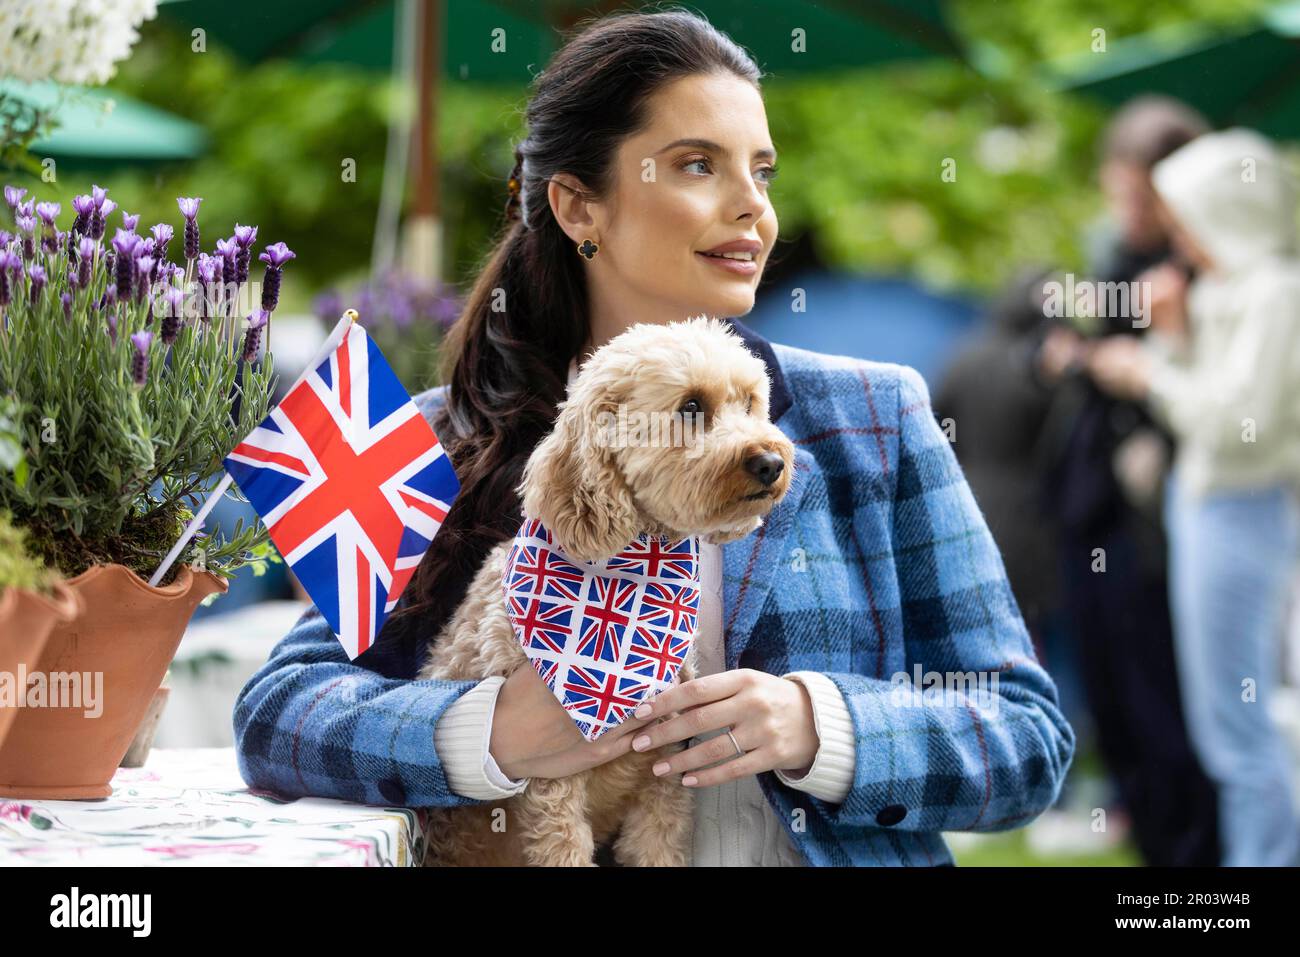 EDITORIAL USE ONLY Lauren Amiri and dog Beignet at the Mayfair ...